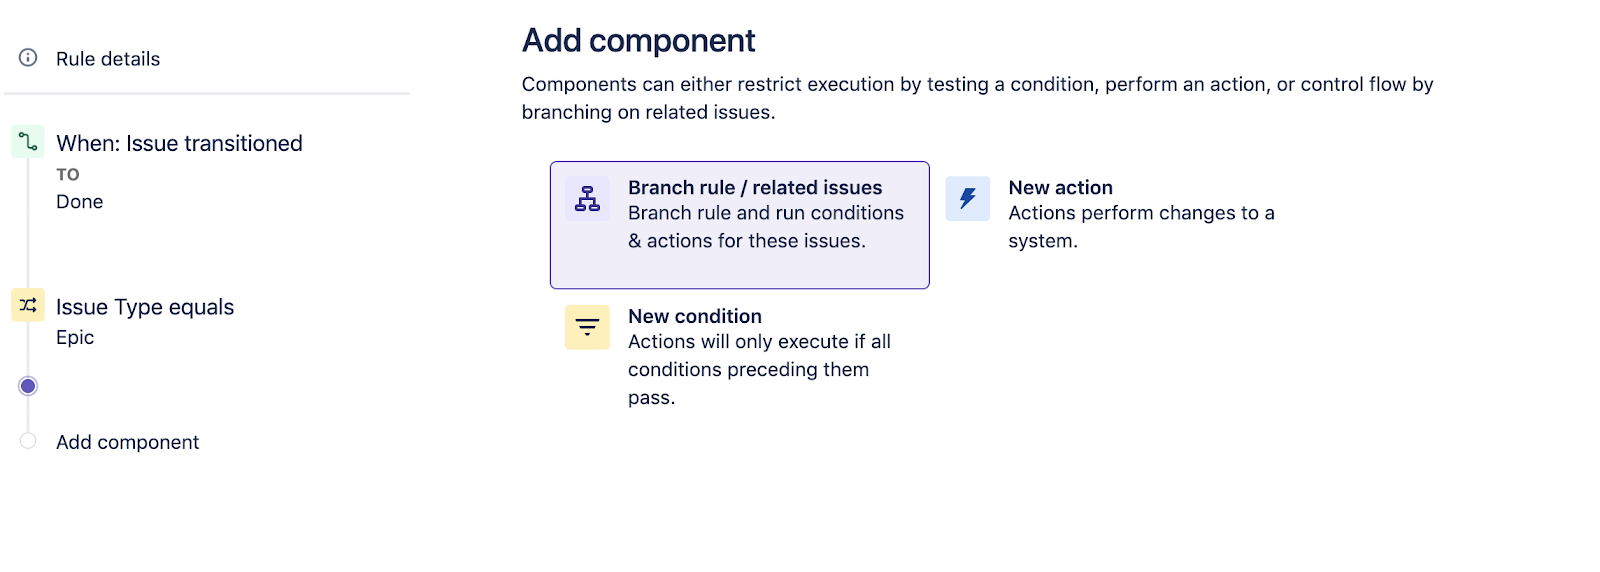 Add branch rule component